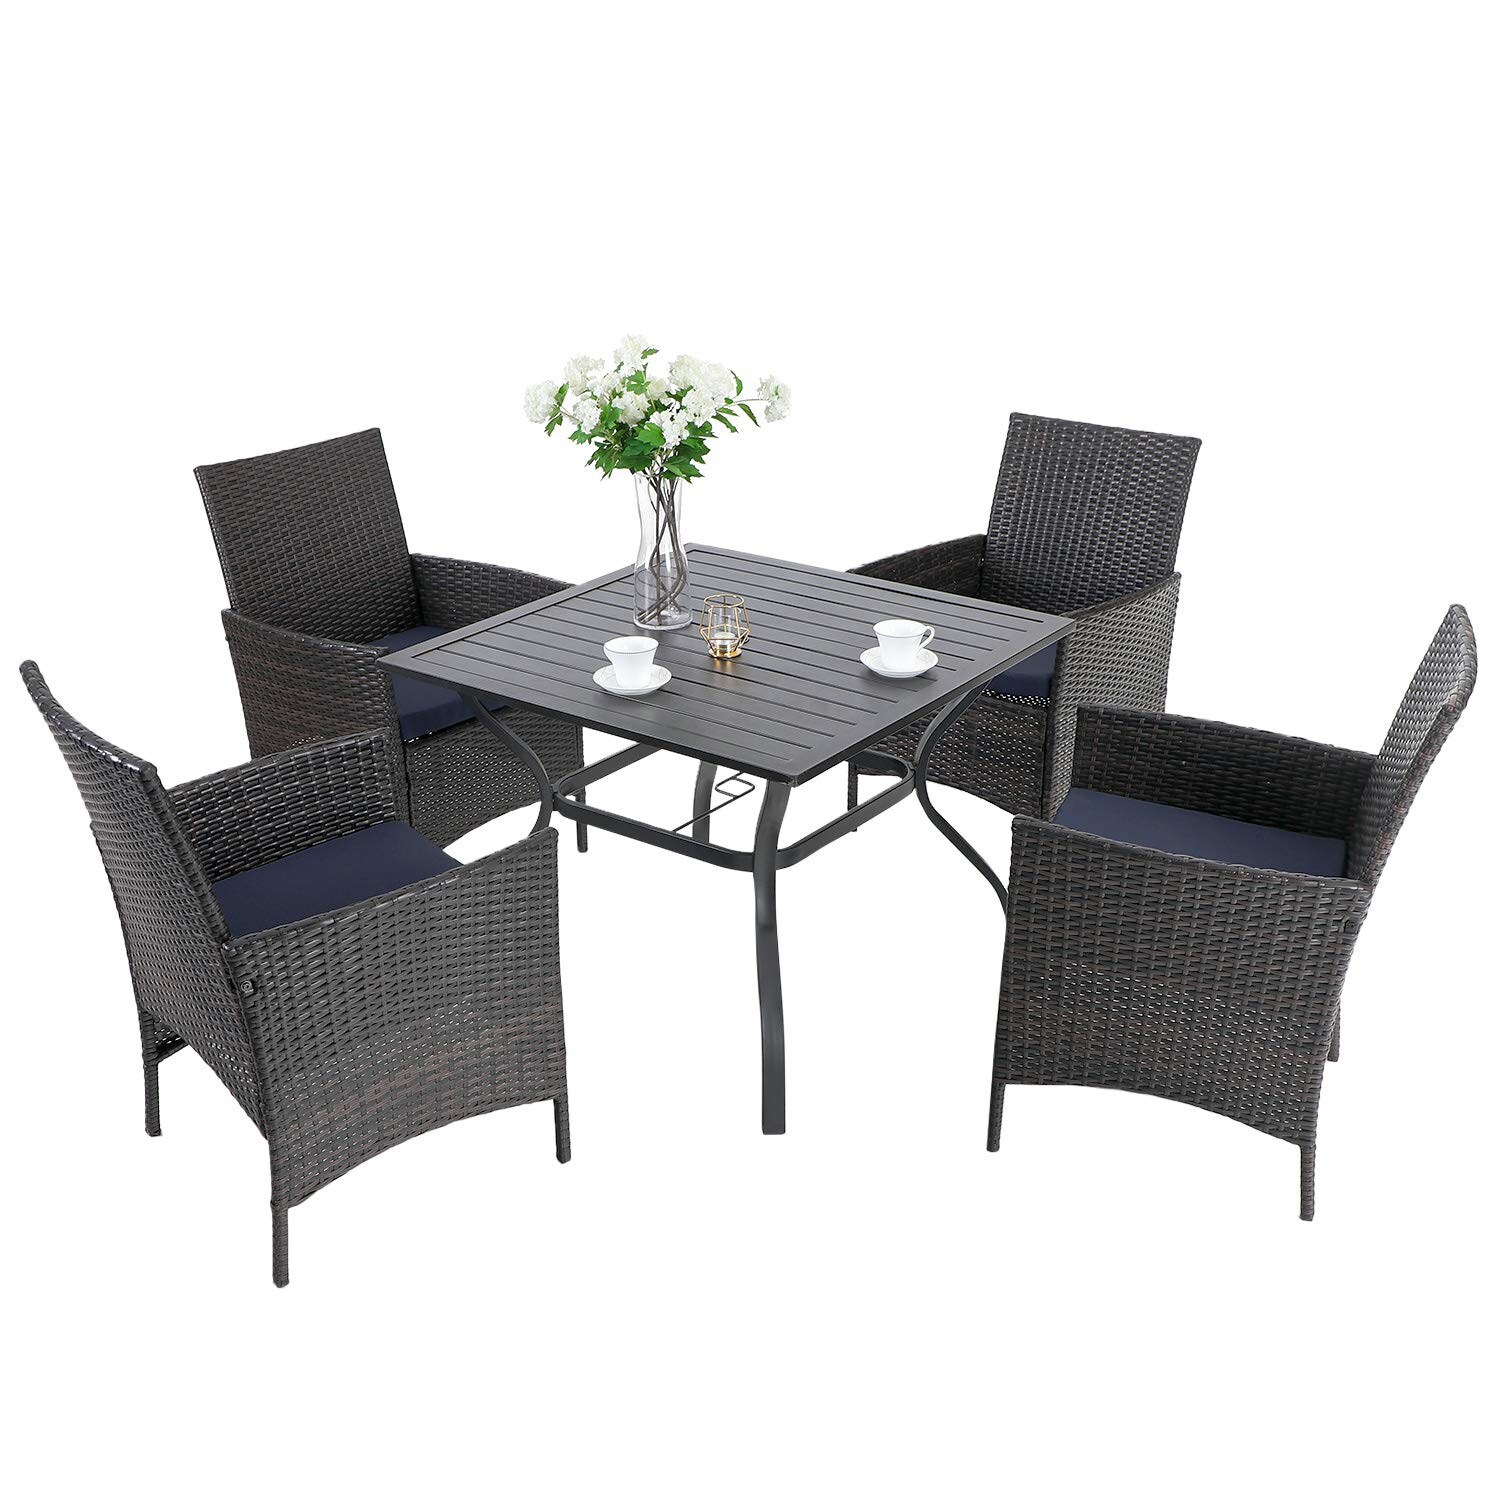 Phi Villa 5 Piece Patio Dining Sets Includes 37" Square Metal Bistro Table With 1.57" Umbrella Hole And 4 Rattan Garden Chairs